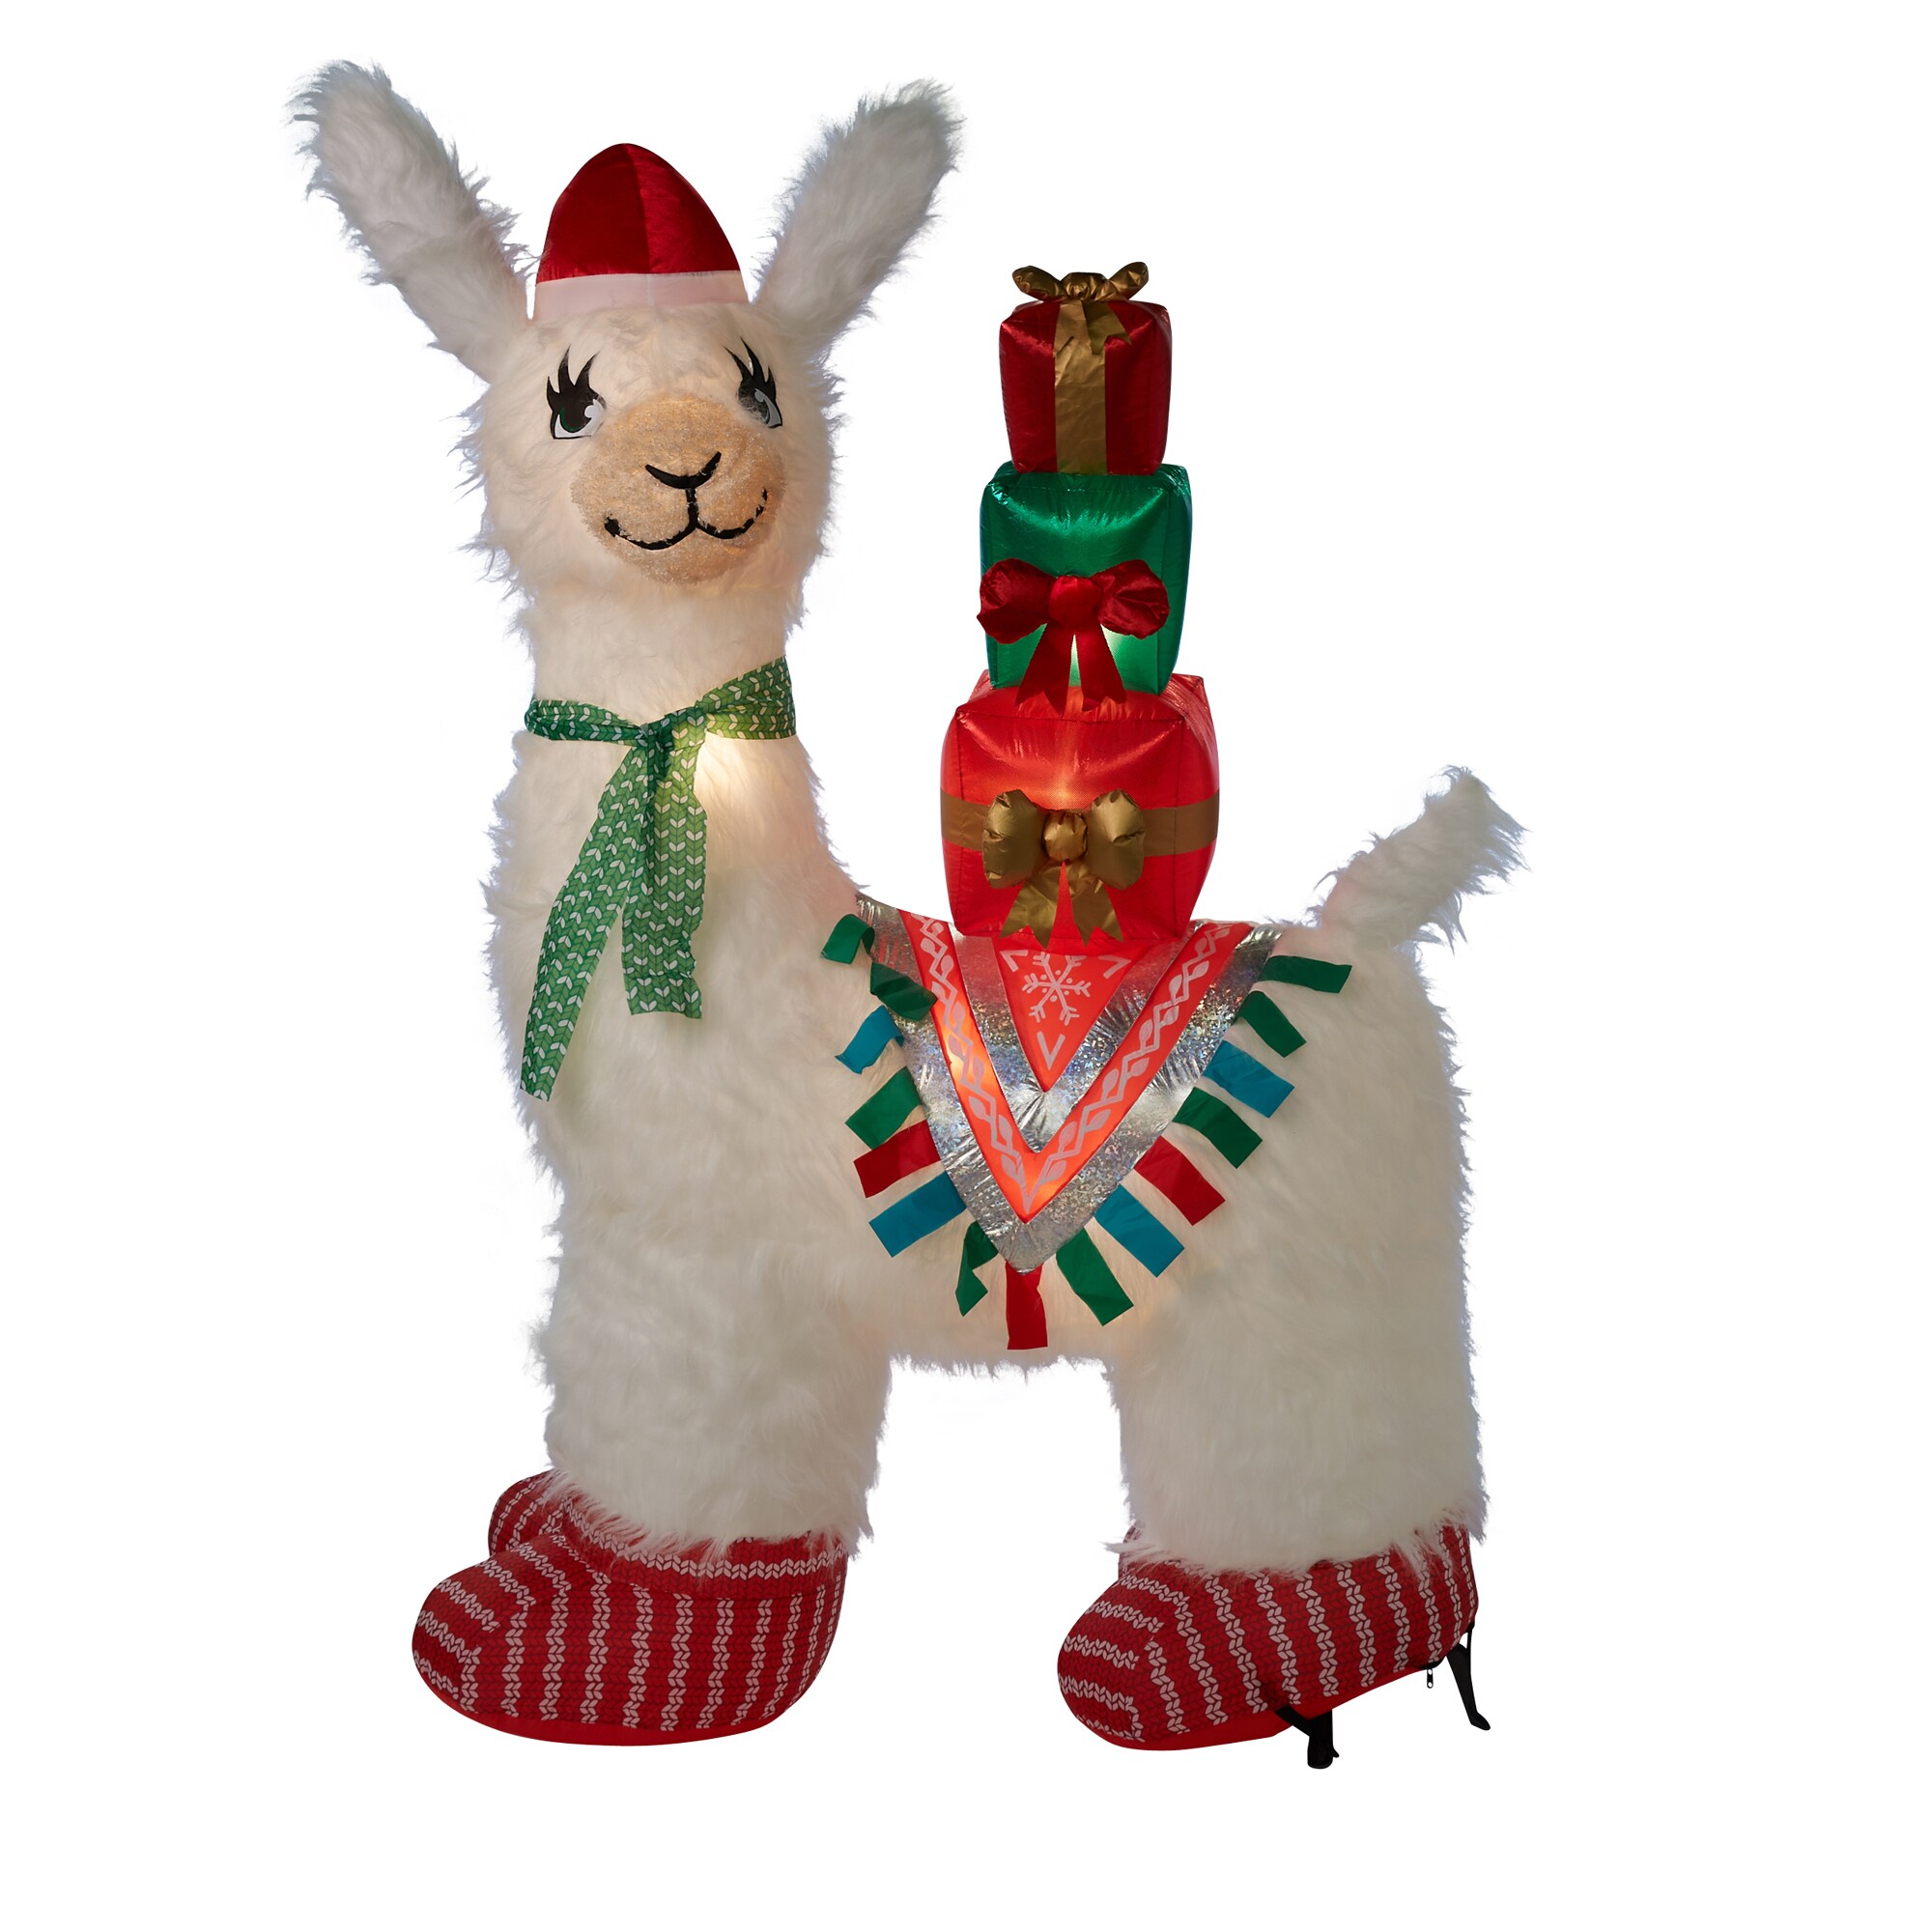 24" Light Blue Alpaca Set of 2 Llama Inflatable Inflate Toy Party Decoration 